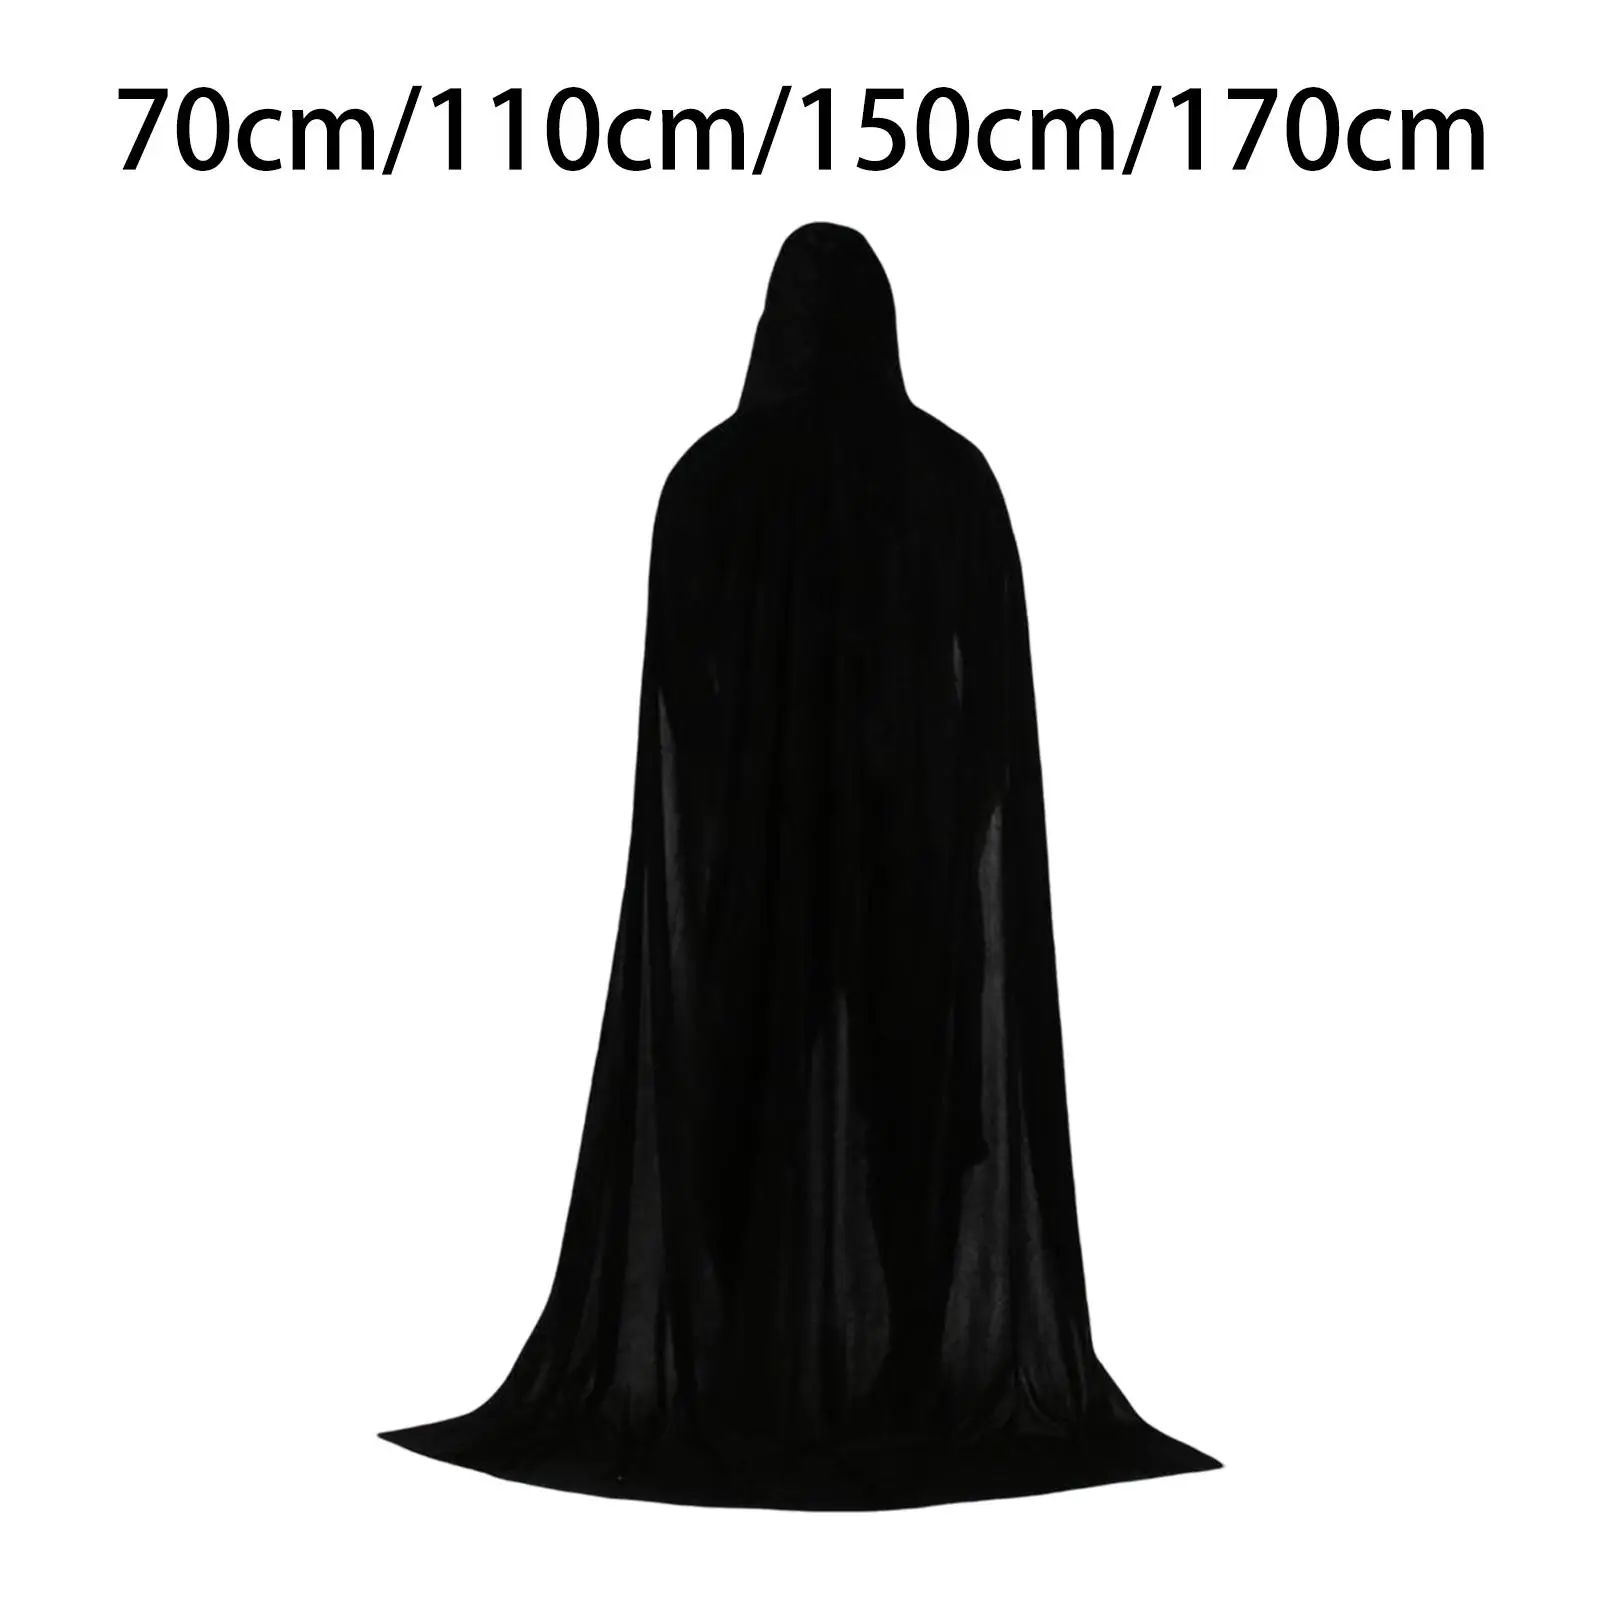 Goth Cloak with Hood Wizard Costume Victorian Fancy Dress Medieval Halloween Cosplay Capes for Adults Party Festival Role Play